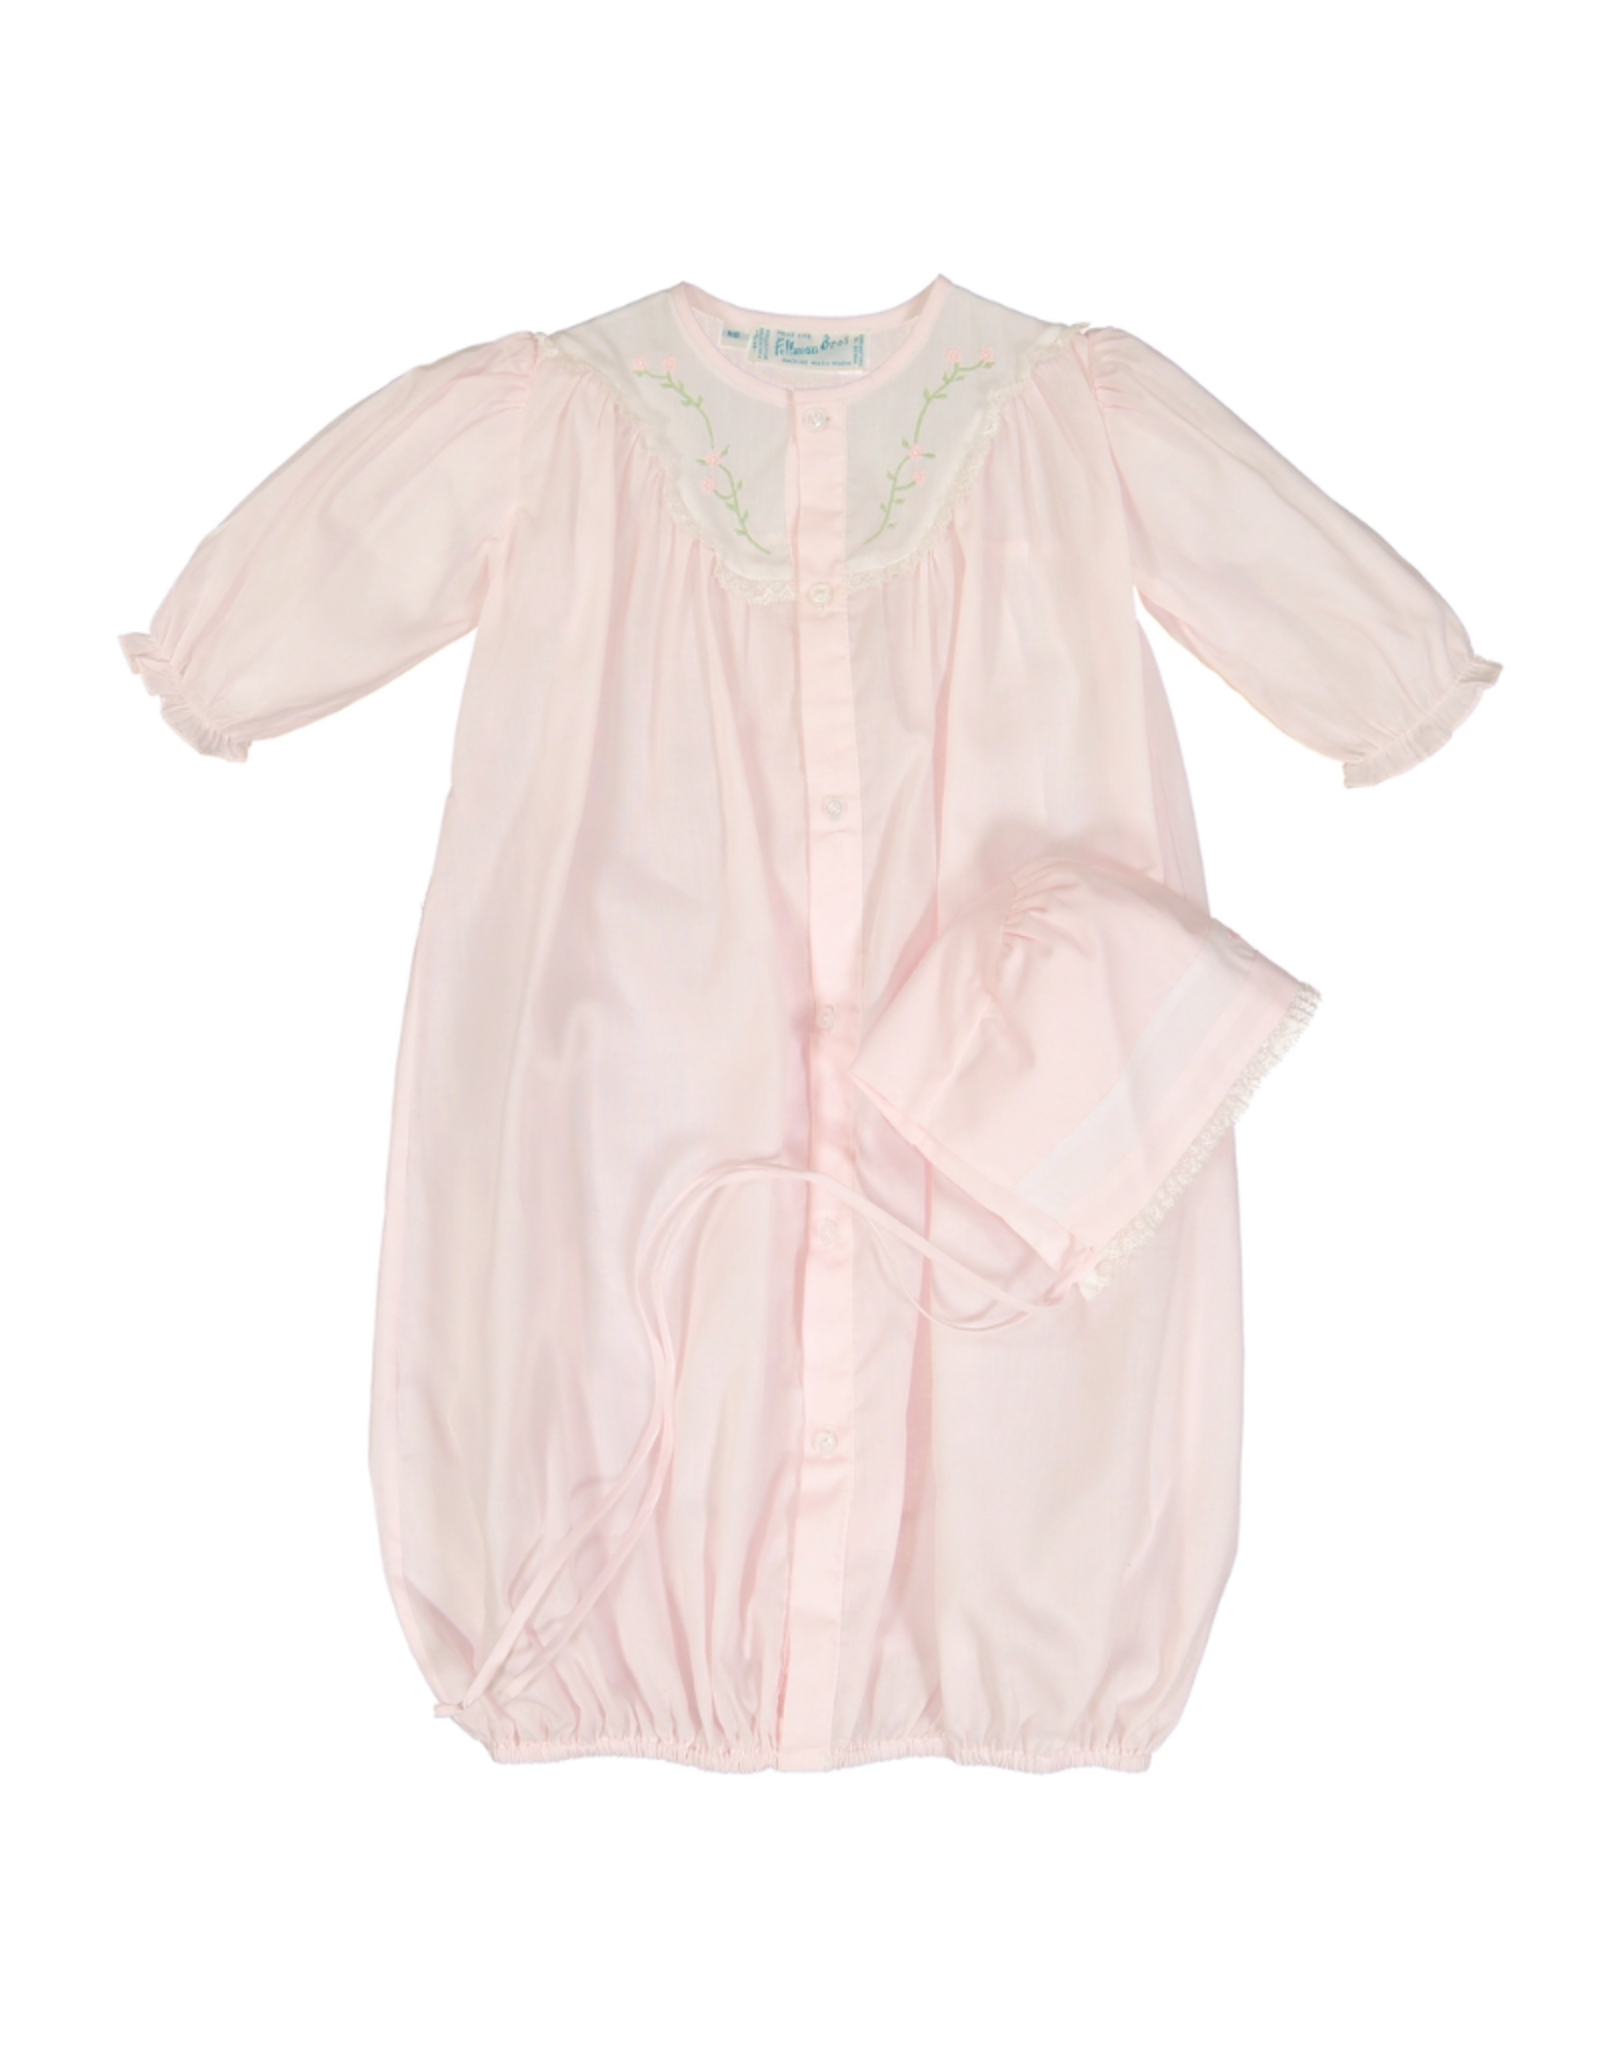 Feltman Brothers Girls Pink Embroidered Yoke Take Me Home Gown NB